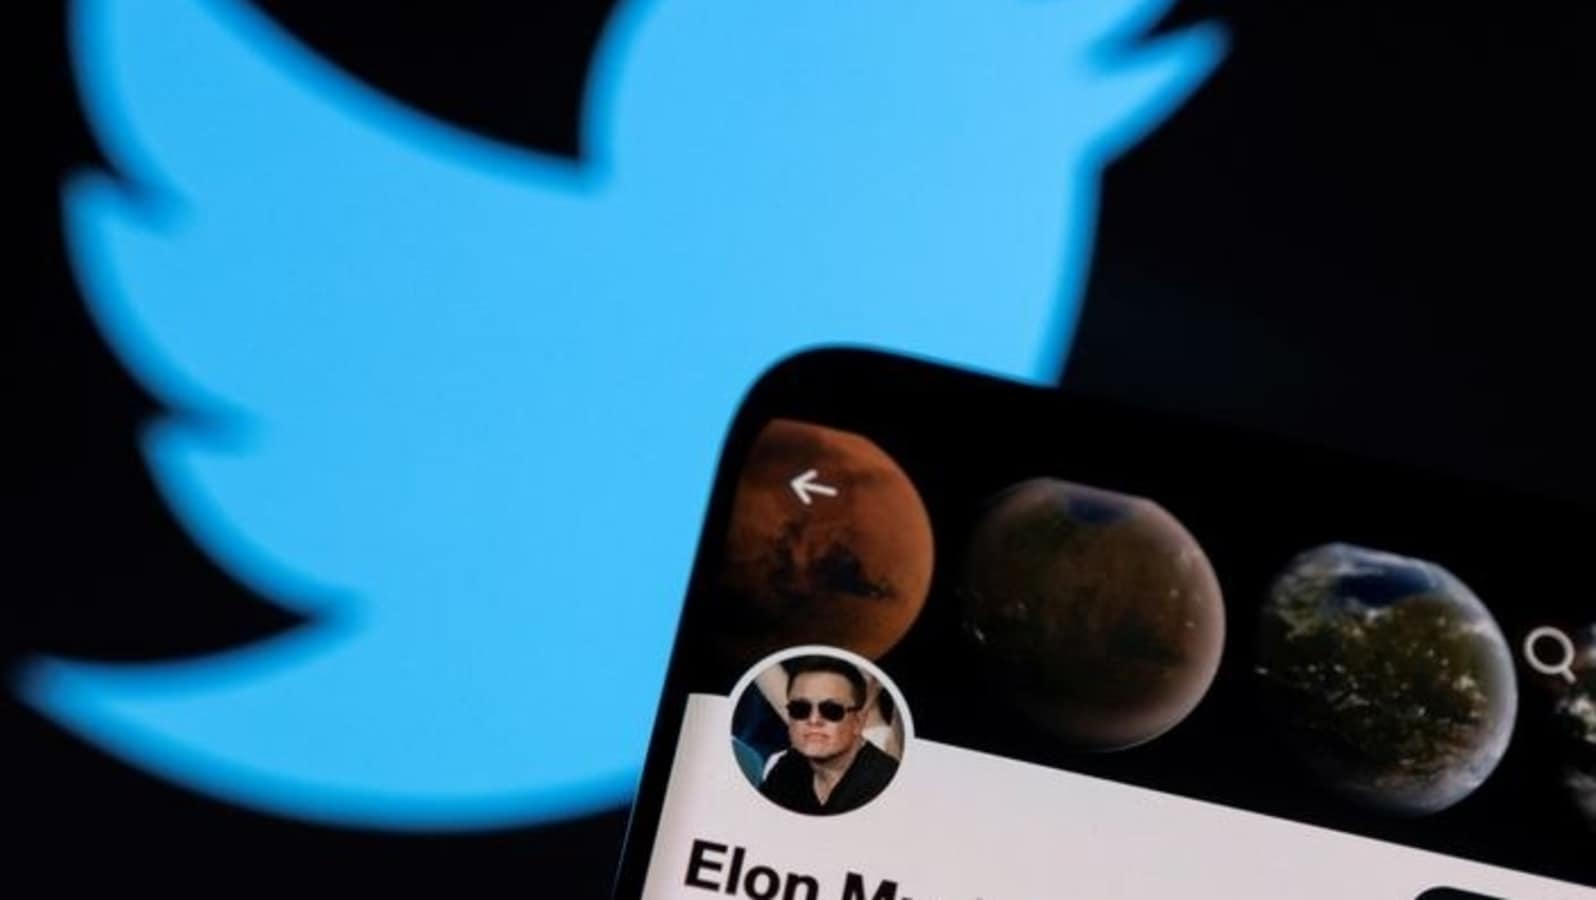 Twitter vs Tesla chief: What led to breach of merger agreement, as per Elon Musk